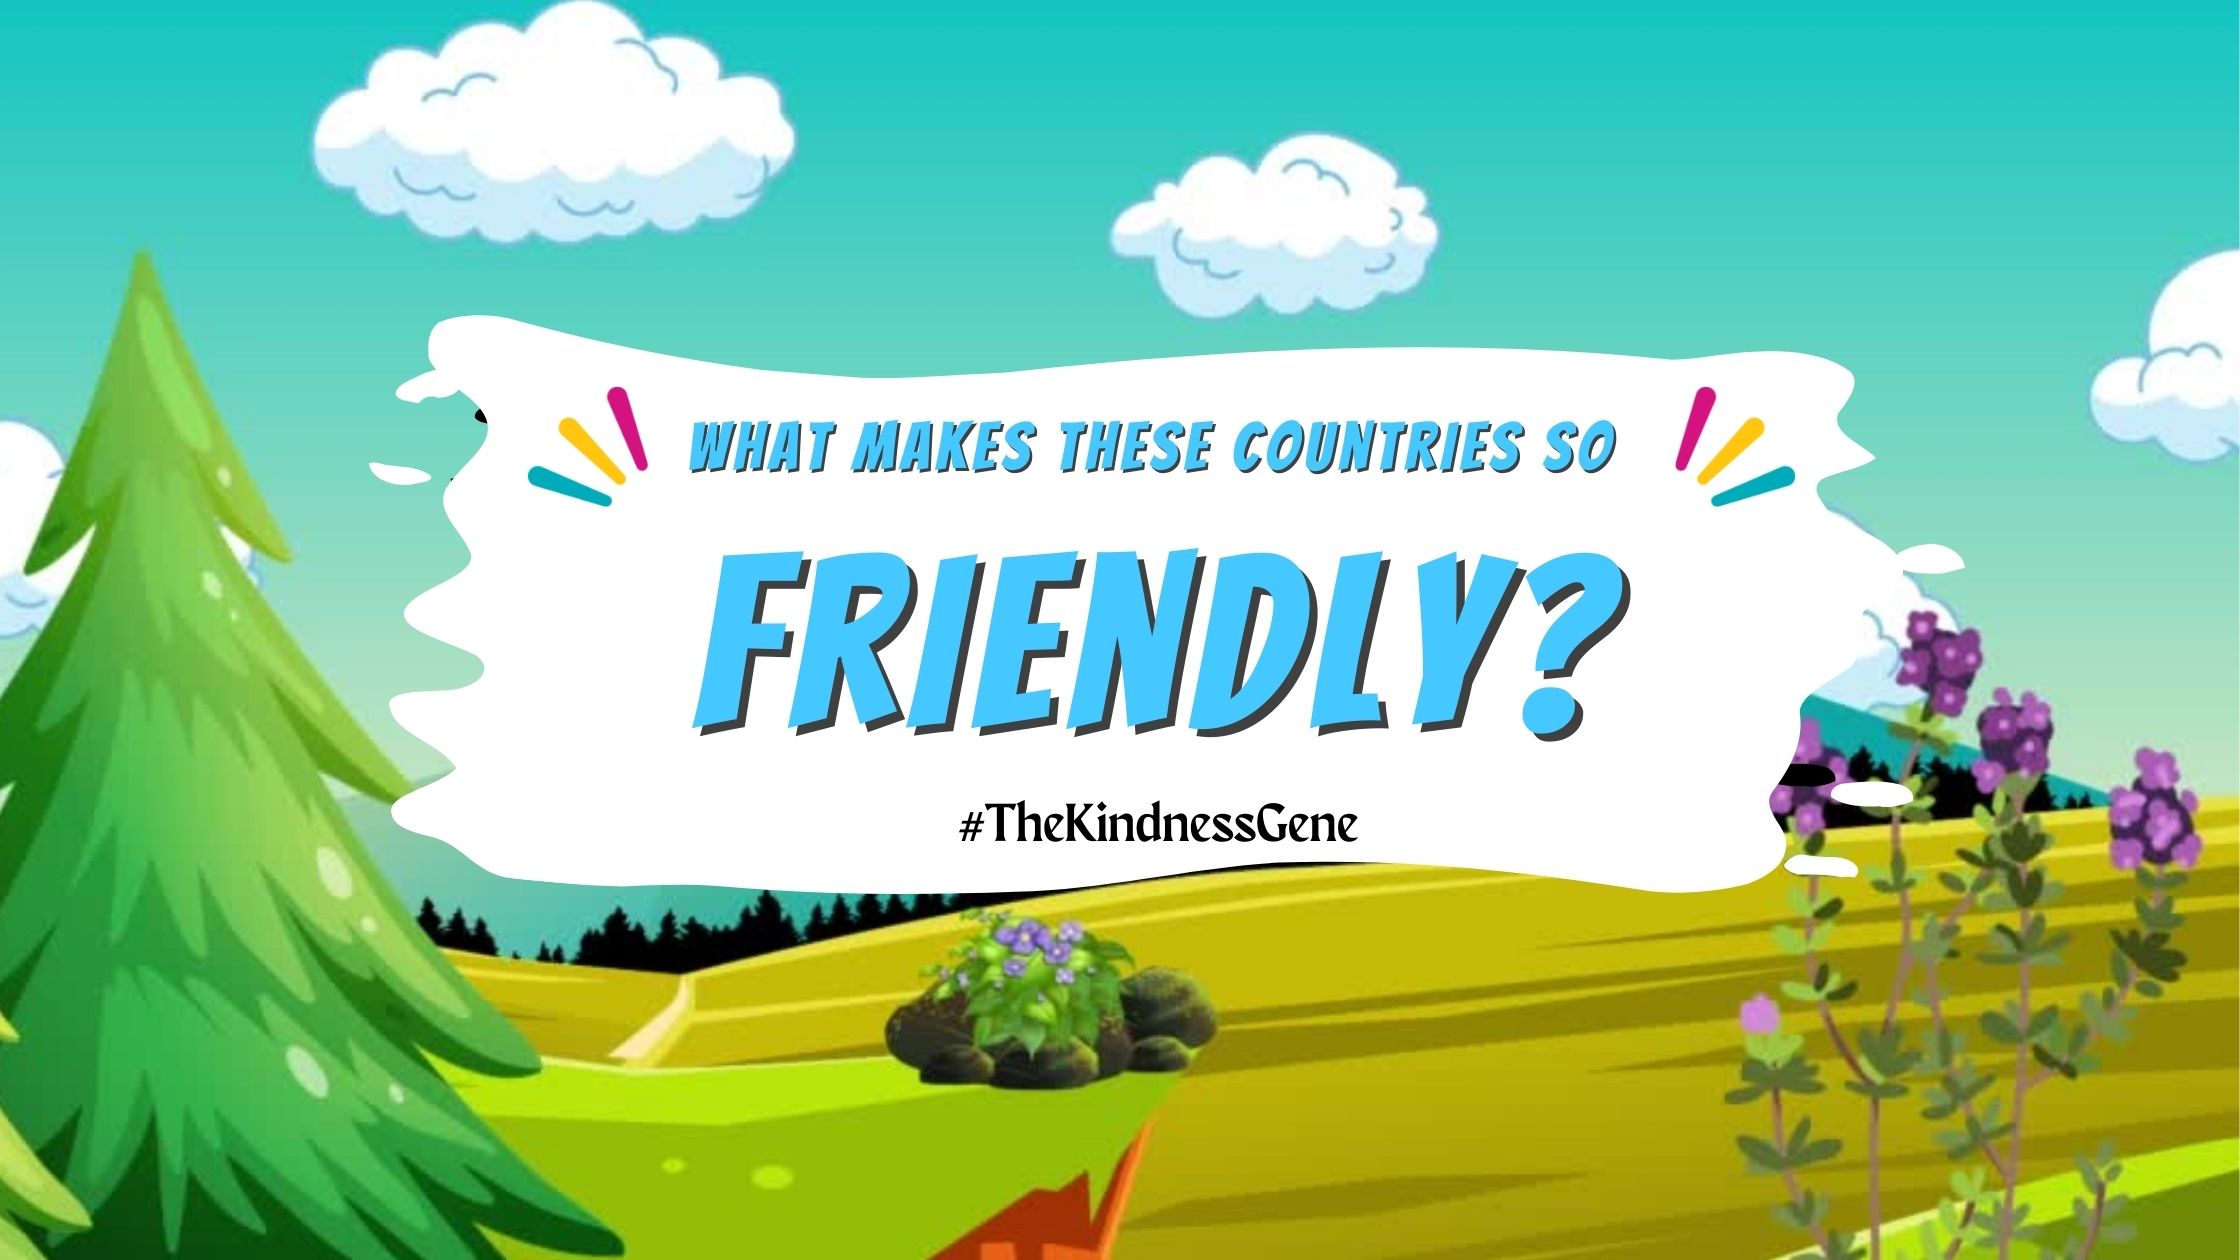 What makes these countries so friendly?